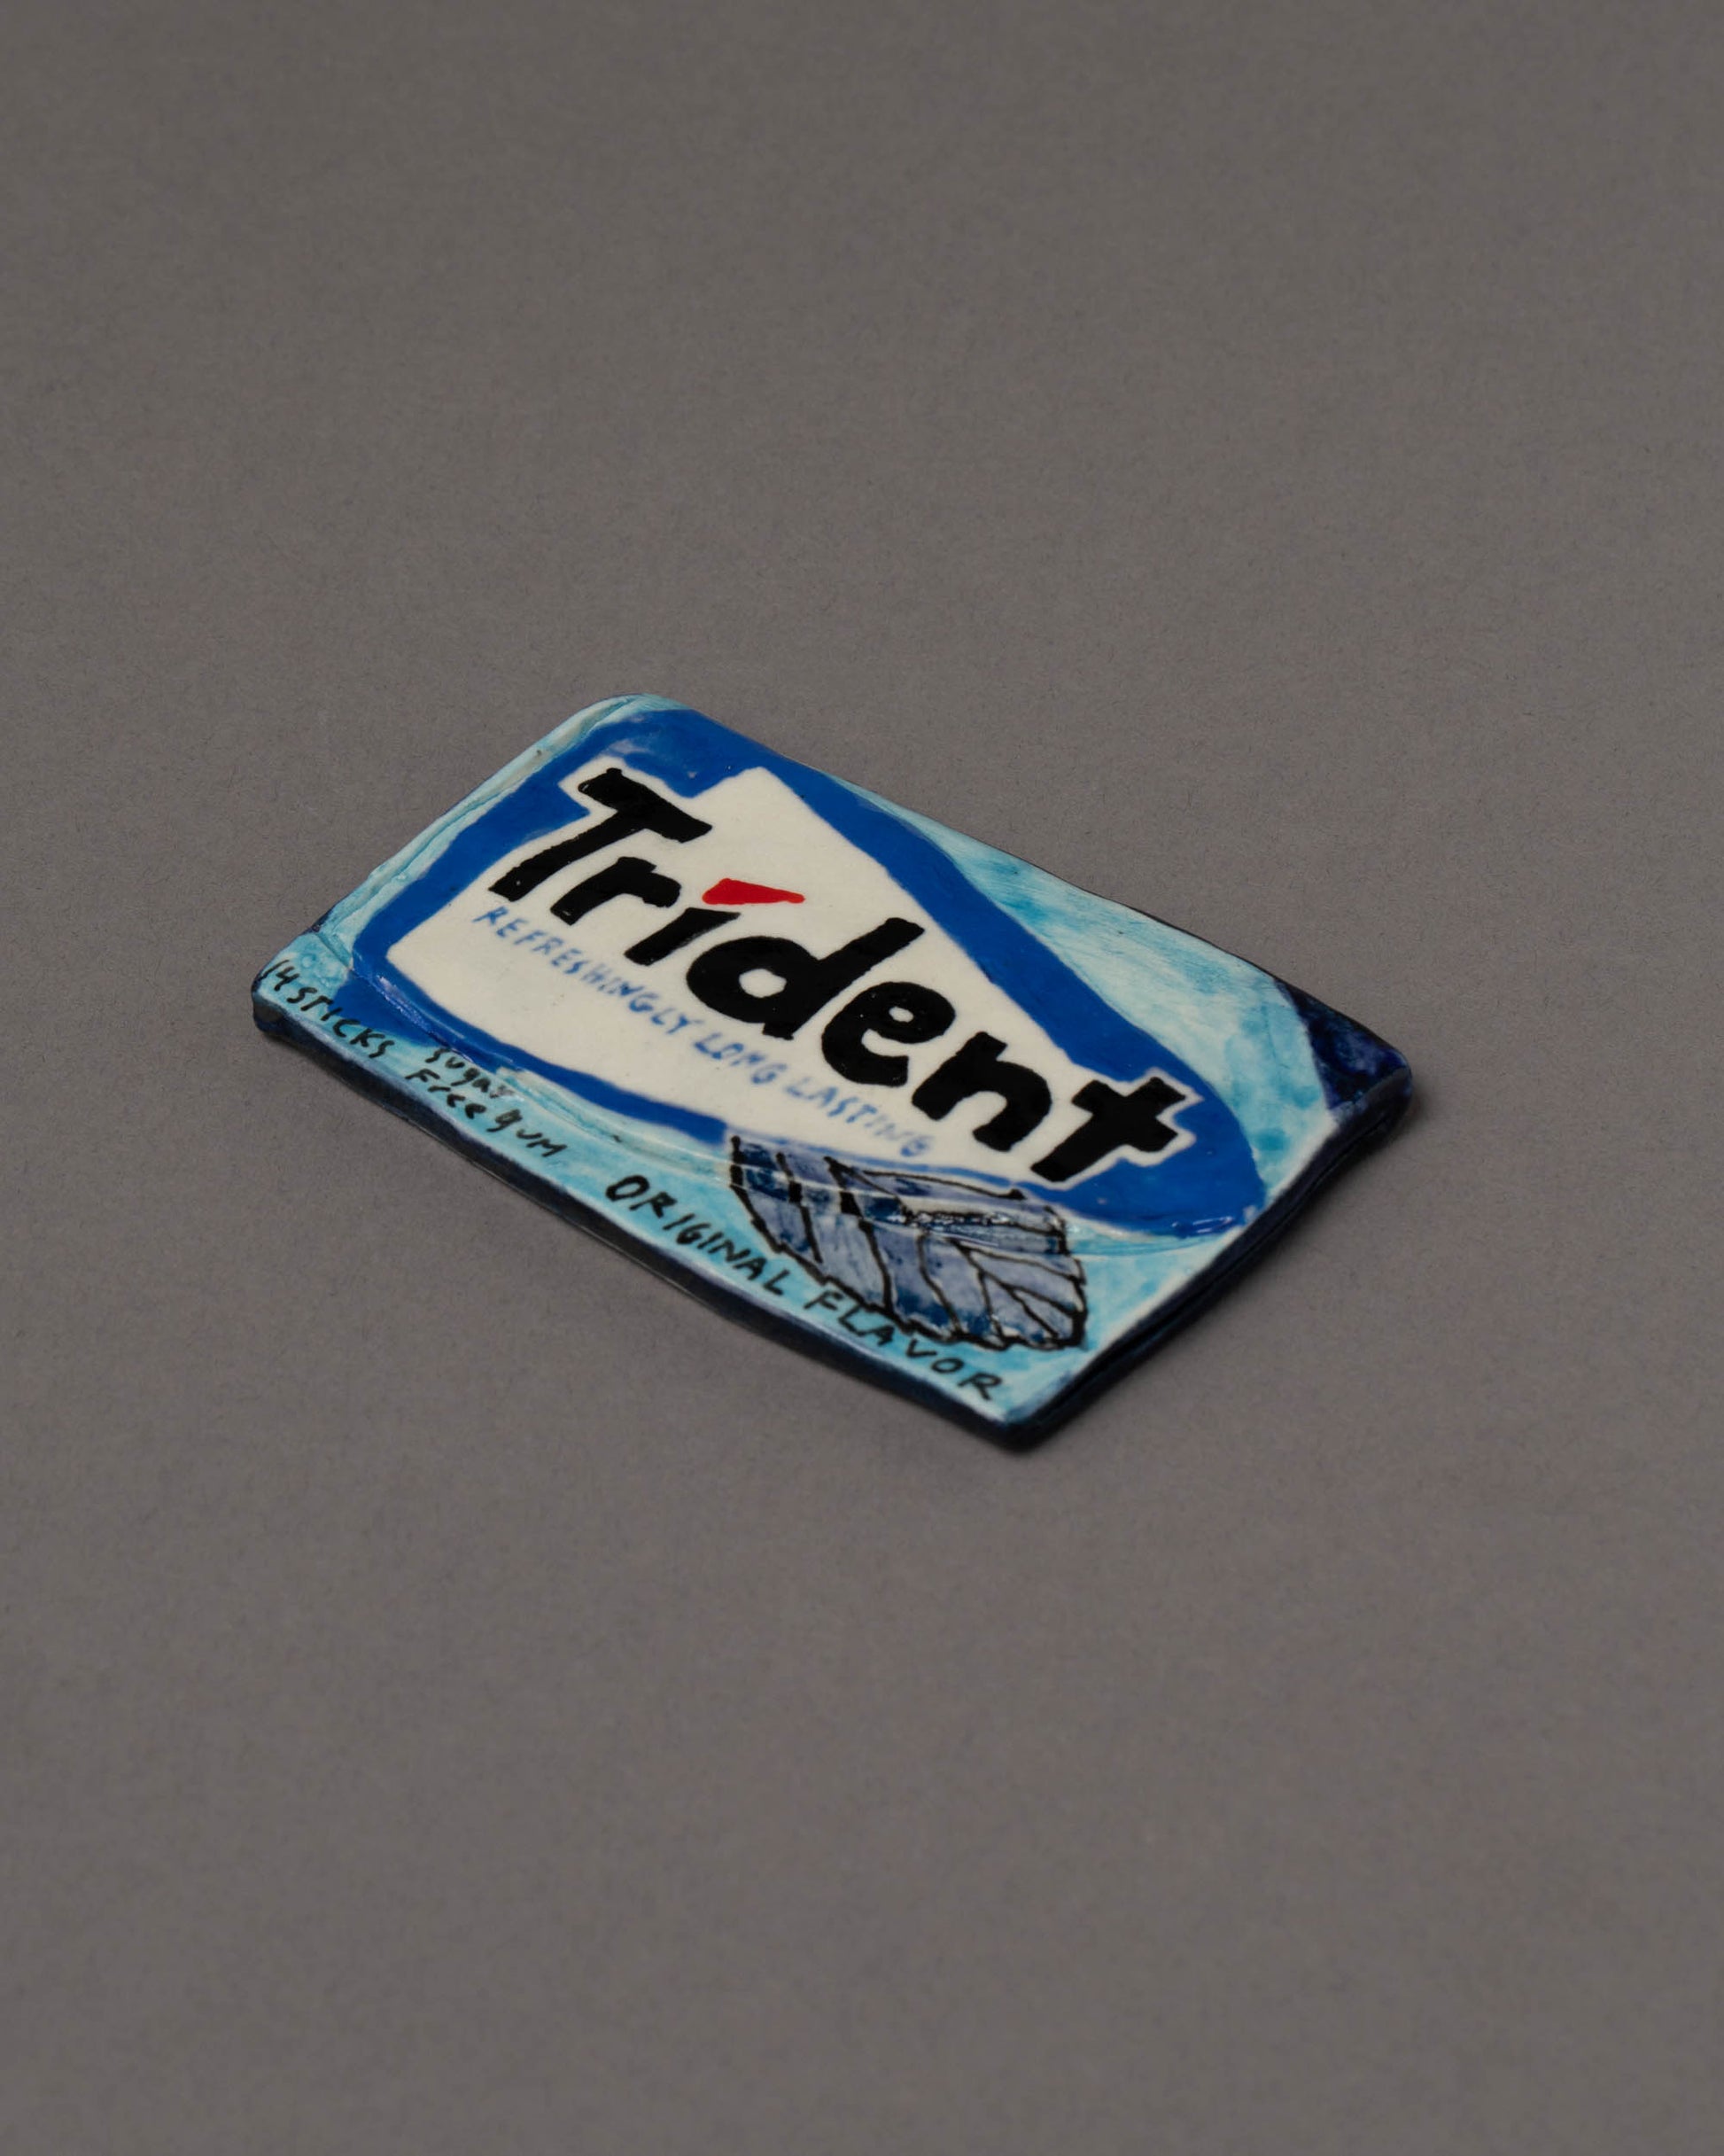 Suzanne Sullivan Trident Gum Considering Utility Objects on light color background.